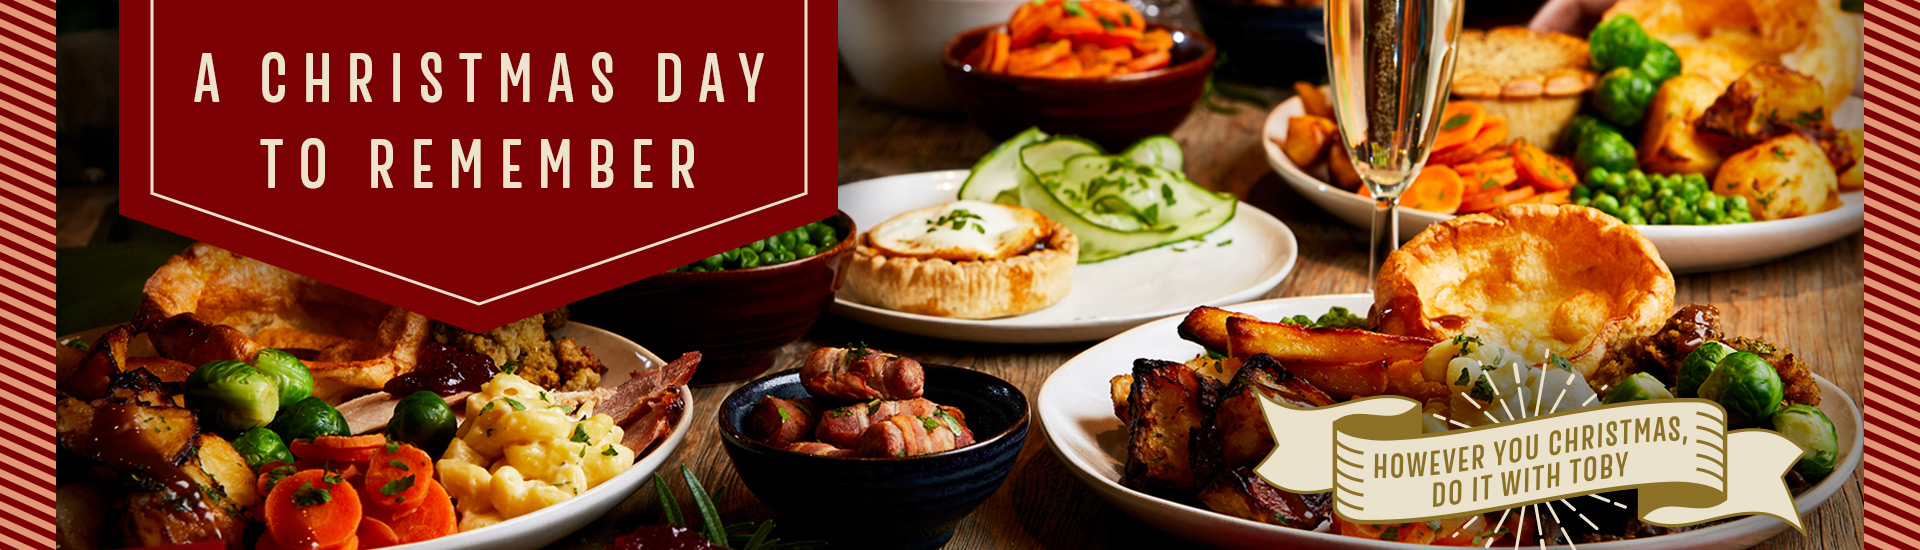 Christmas Day menu at Toby Carvery Quinton